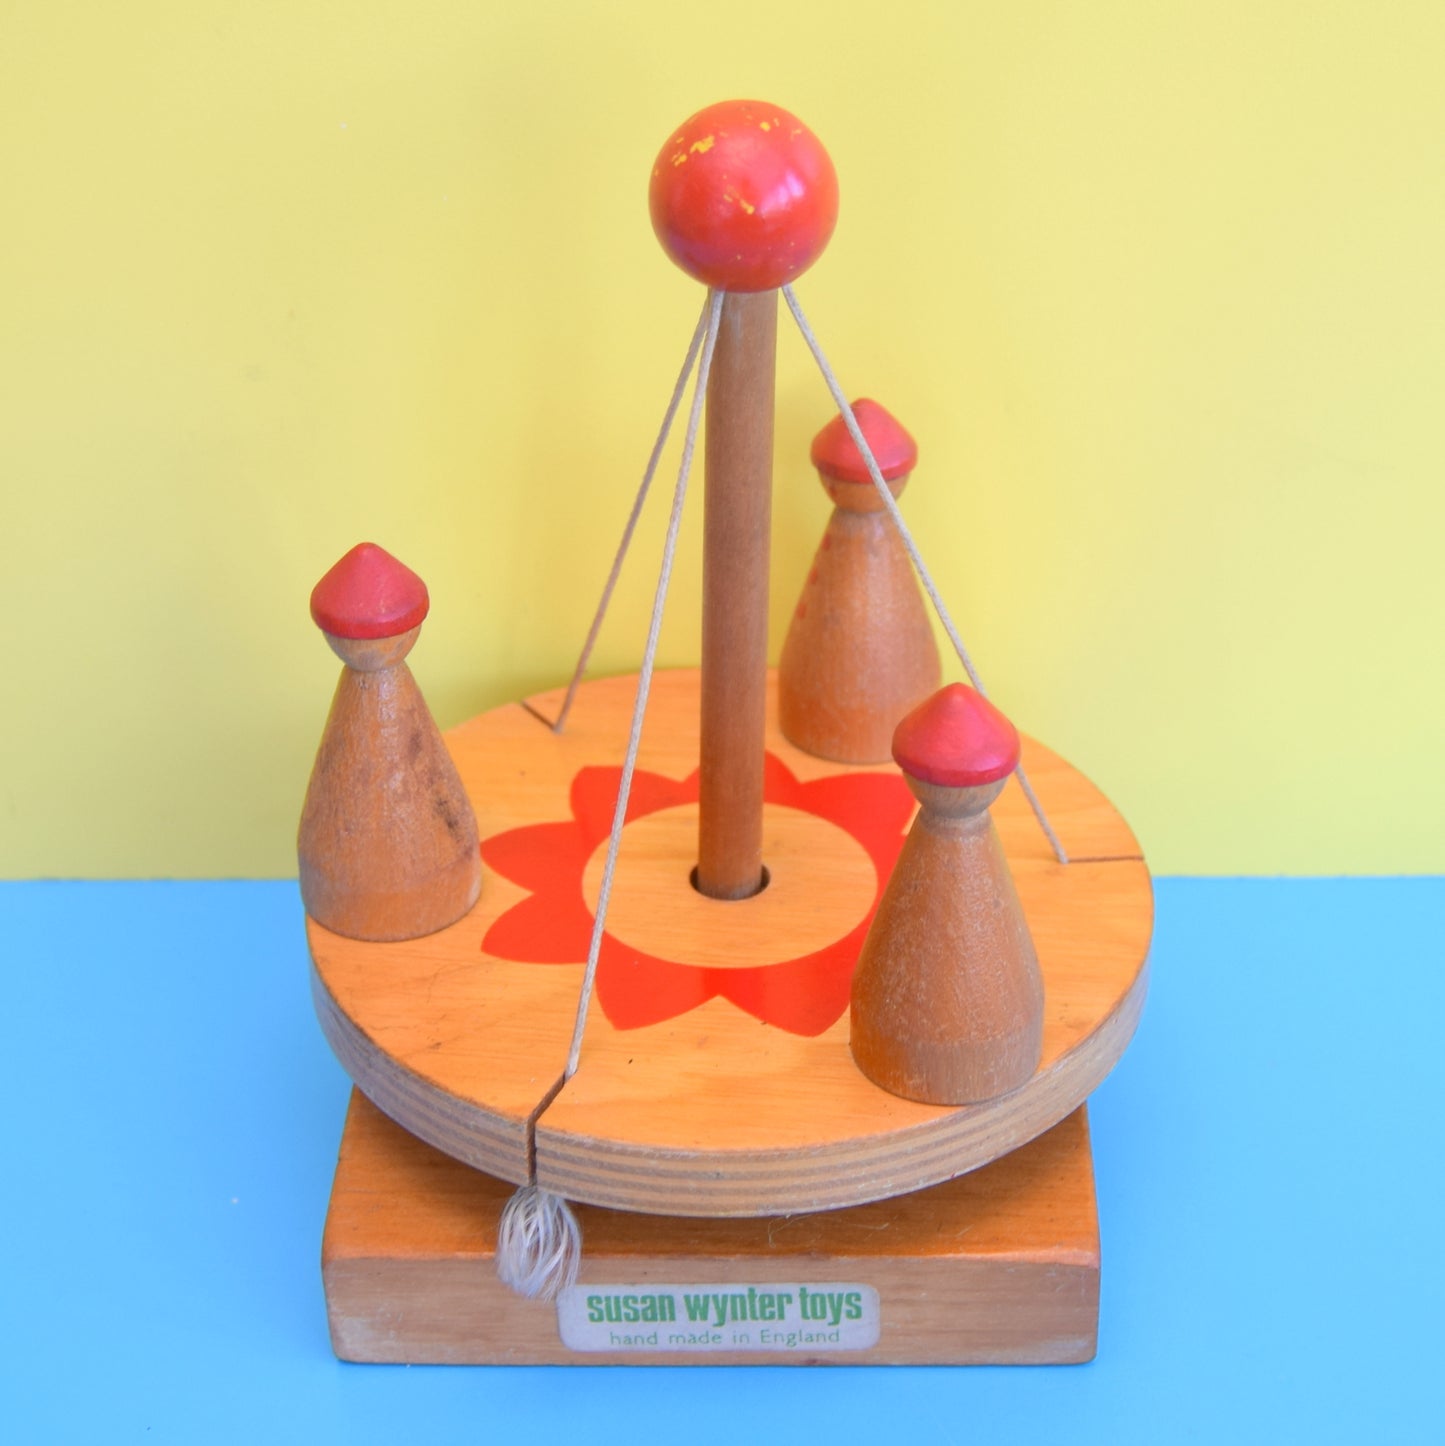 Vintage 1960s Wooden Roundabout Toy- Susan Wynter Toys